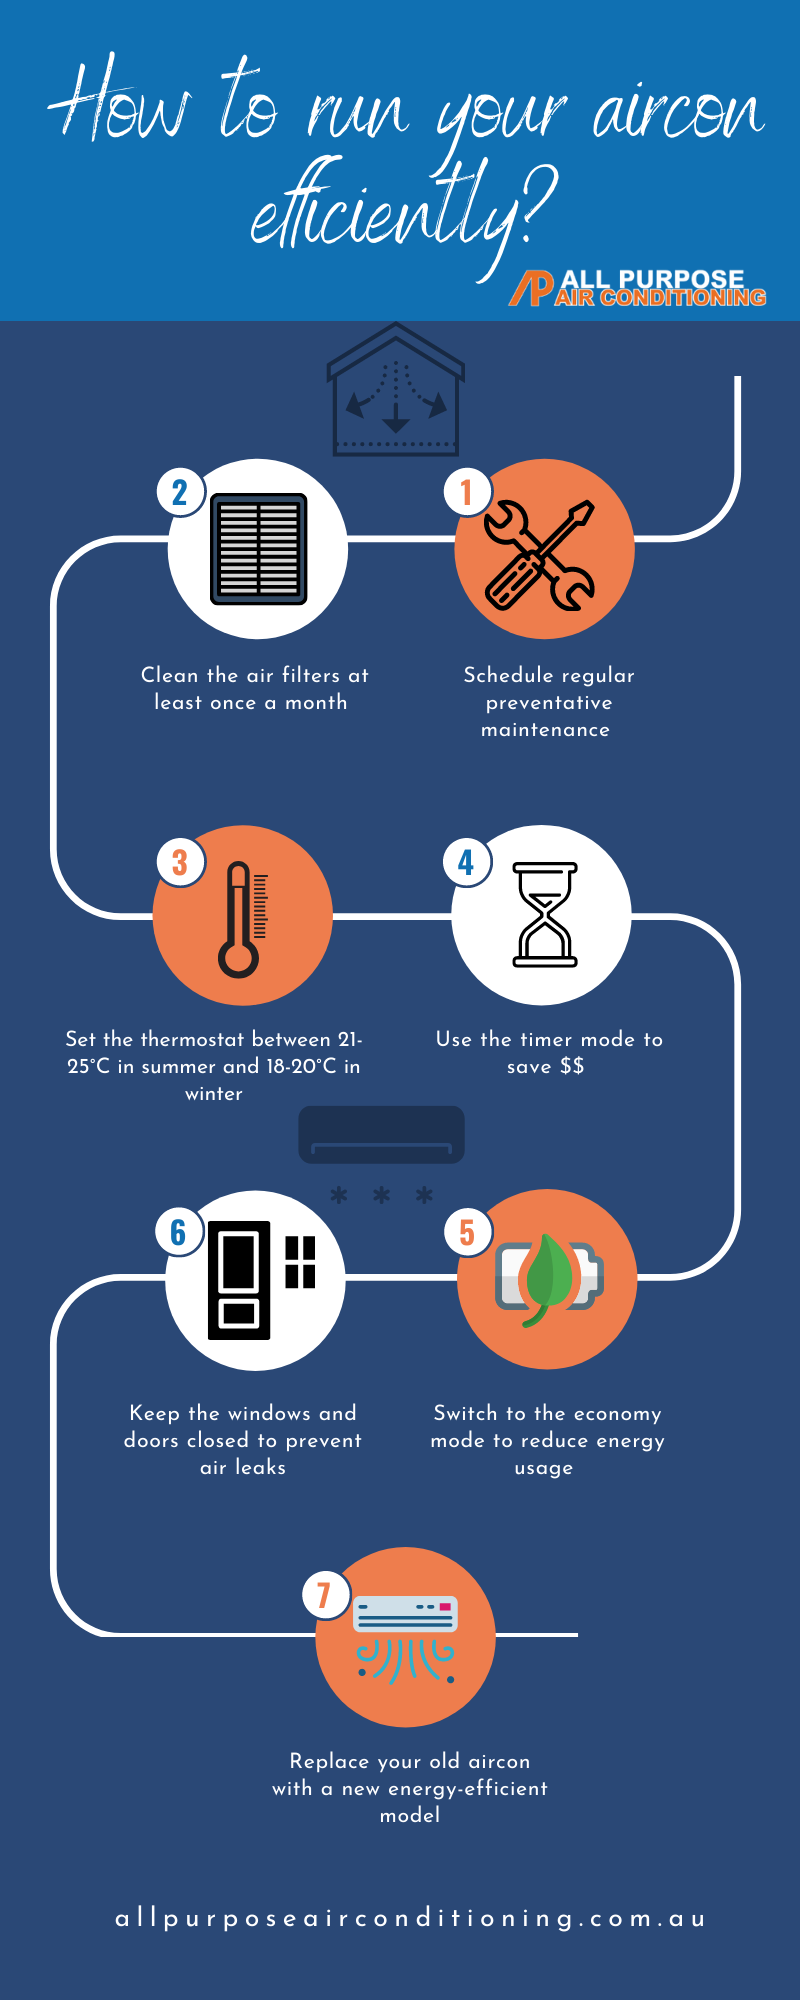 How to run your aircon efficiently - Infographic